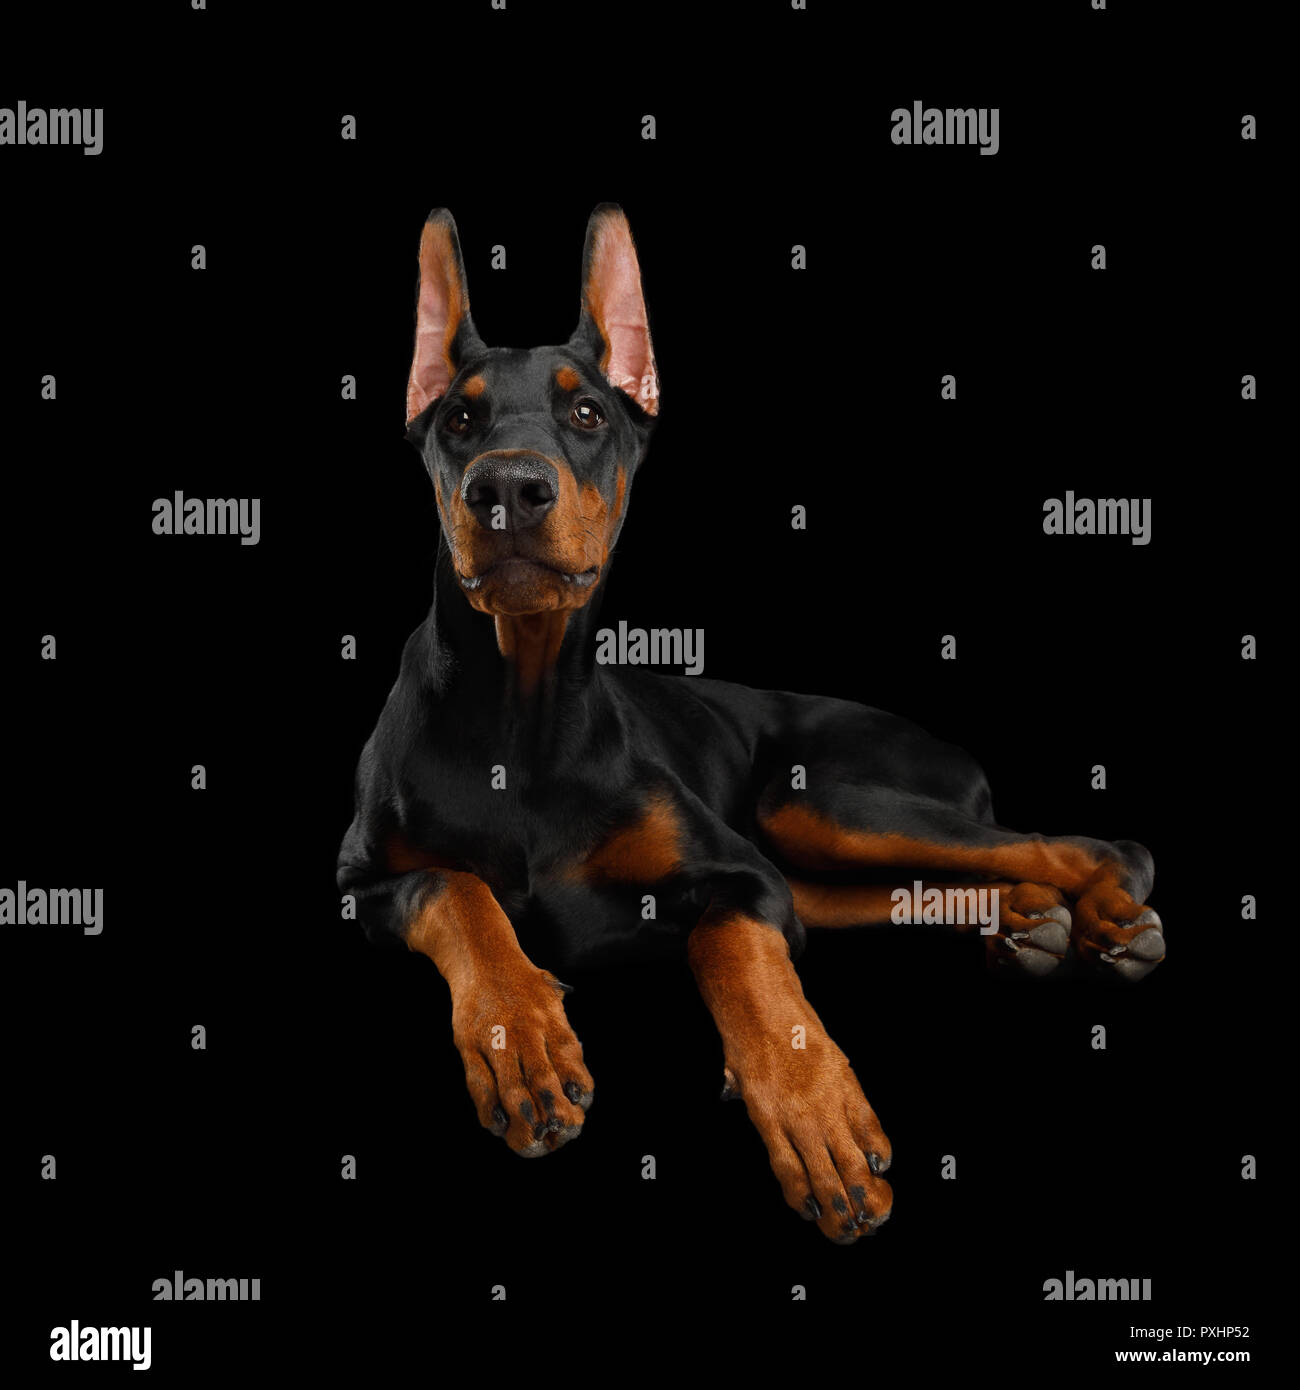 Paws Doberman High Resolution Stock Photography and Images